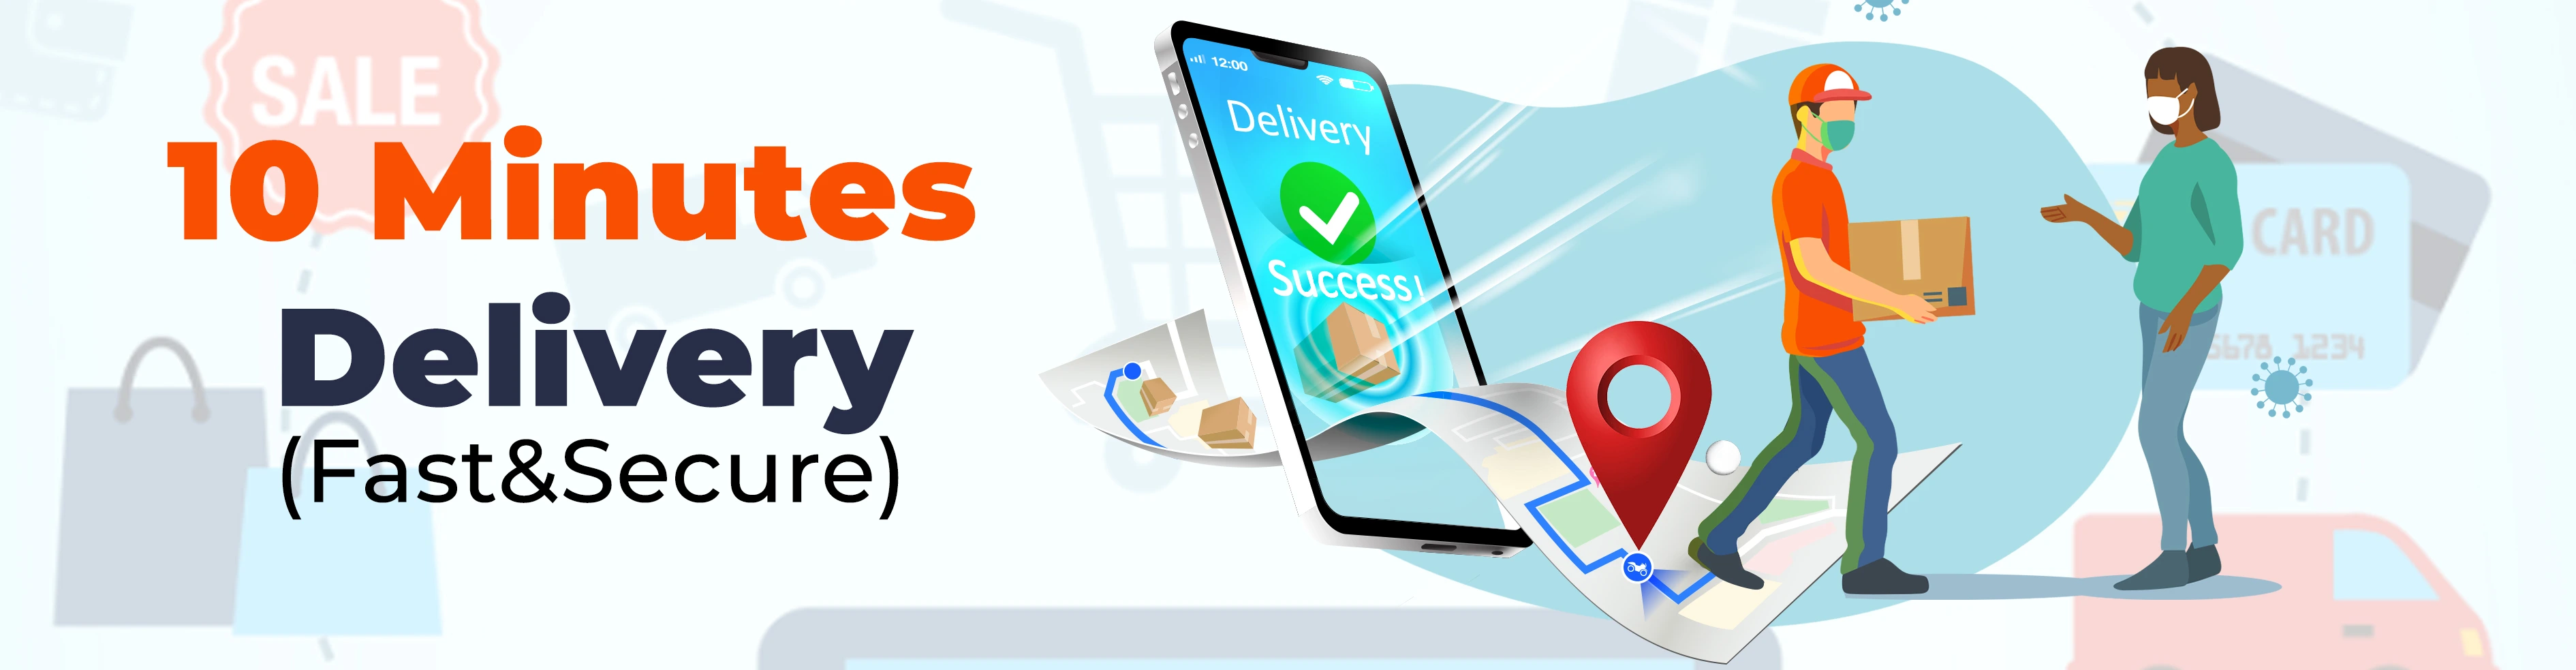 delivers the order in 10 minutes from the app